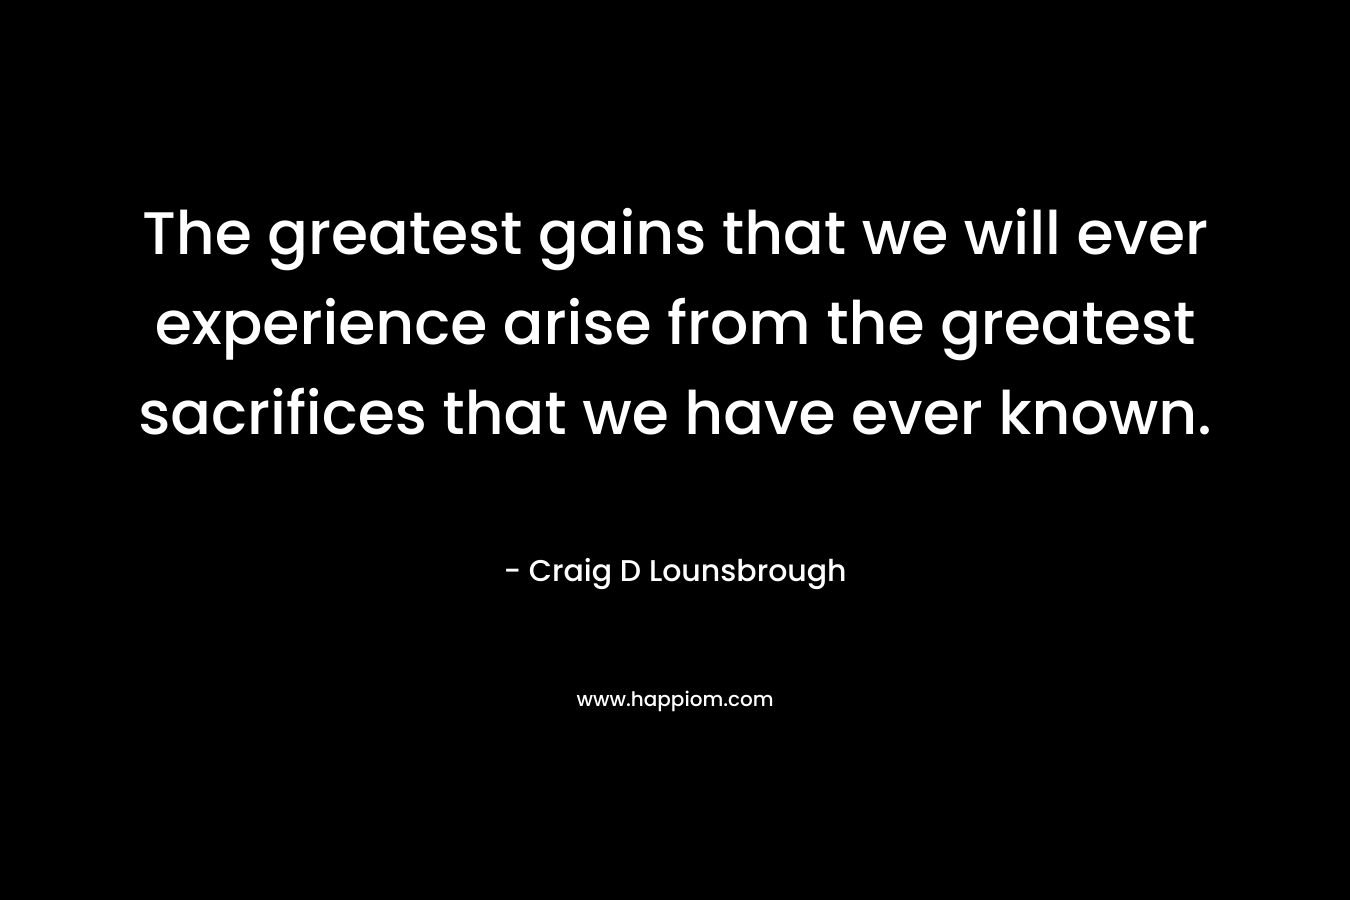 The greatest gains that we will ever experience arise from the greatest sacrifices that we have ever known.